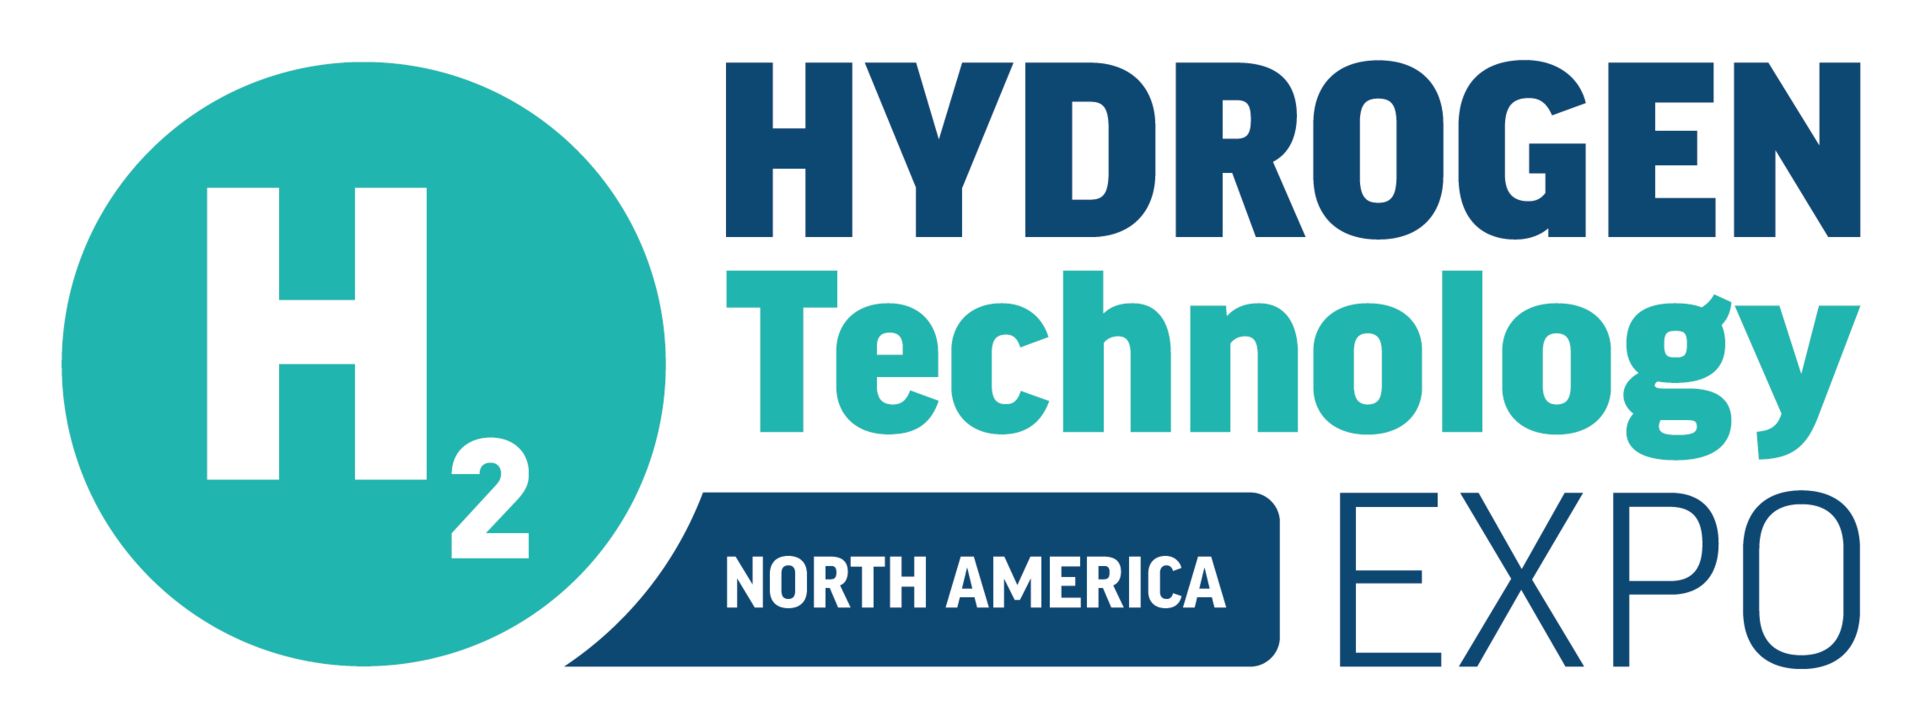 Hydrogen Technology Conference and Expo North America